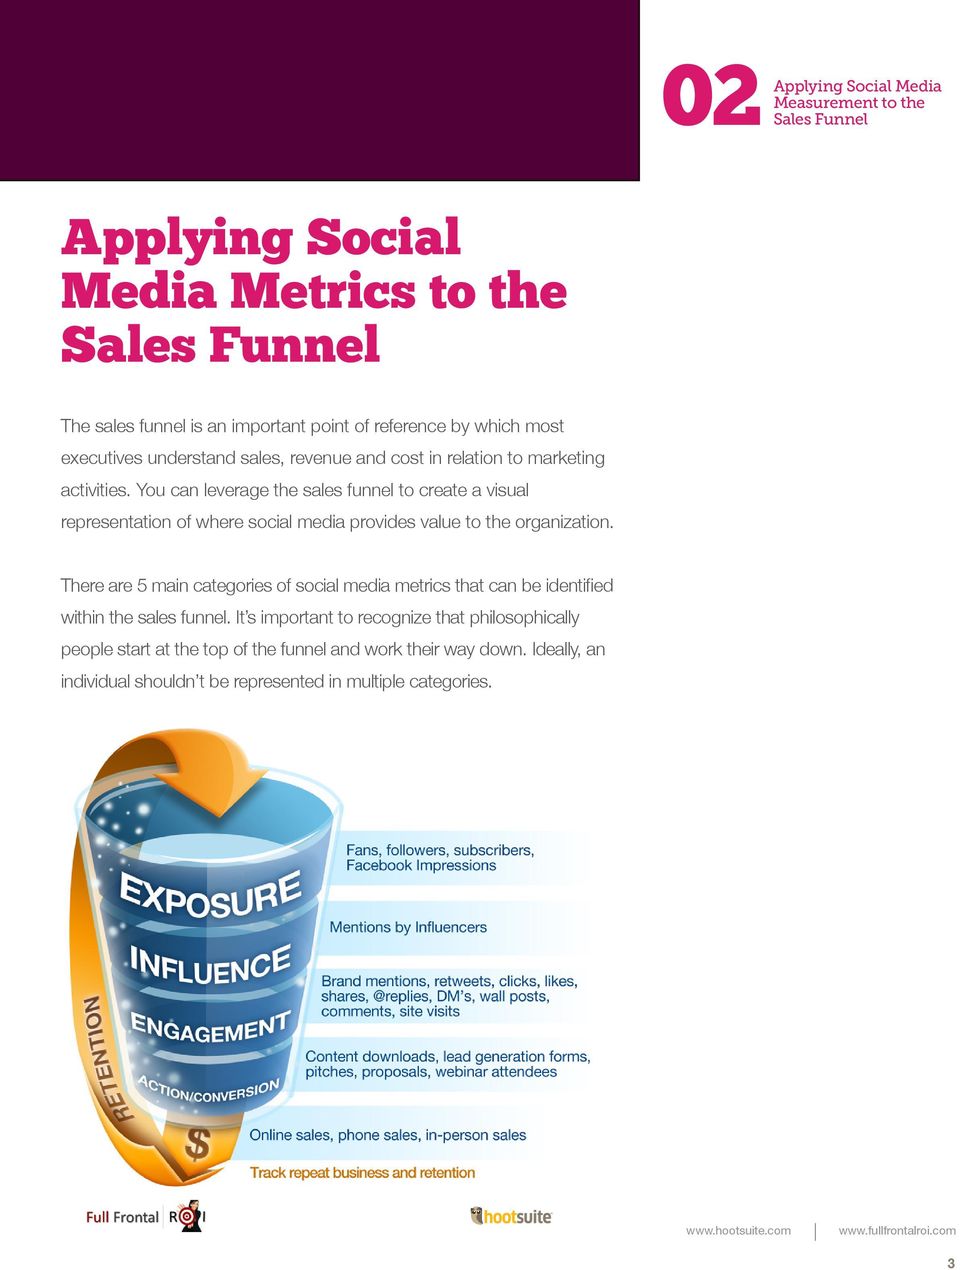 You can leverage the sales funnel to create a visual representation of where social media provides value to the organization.